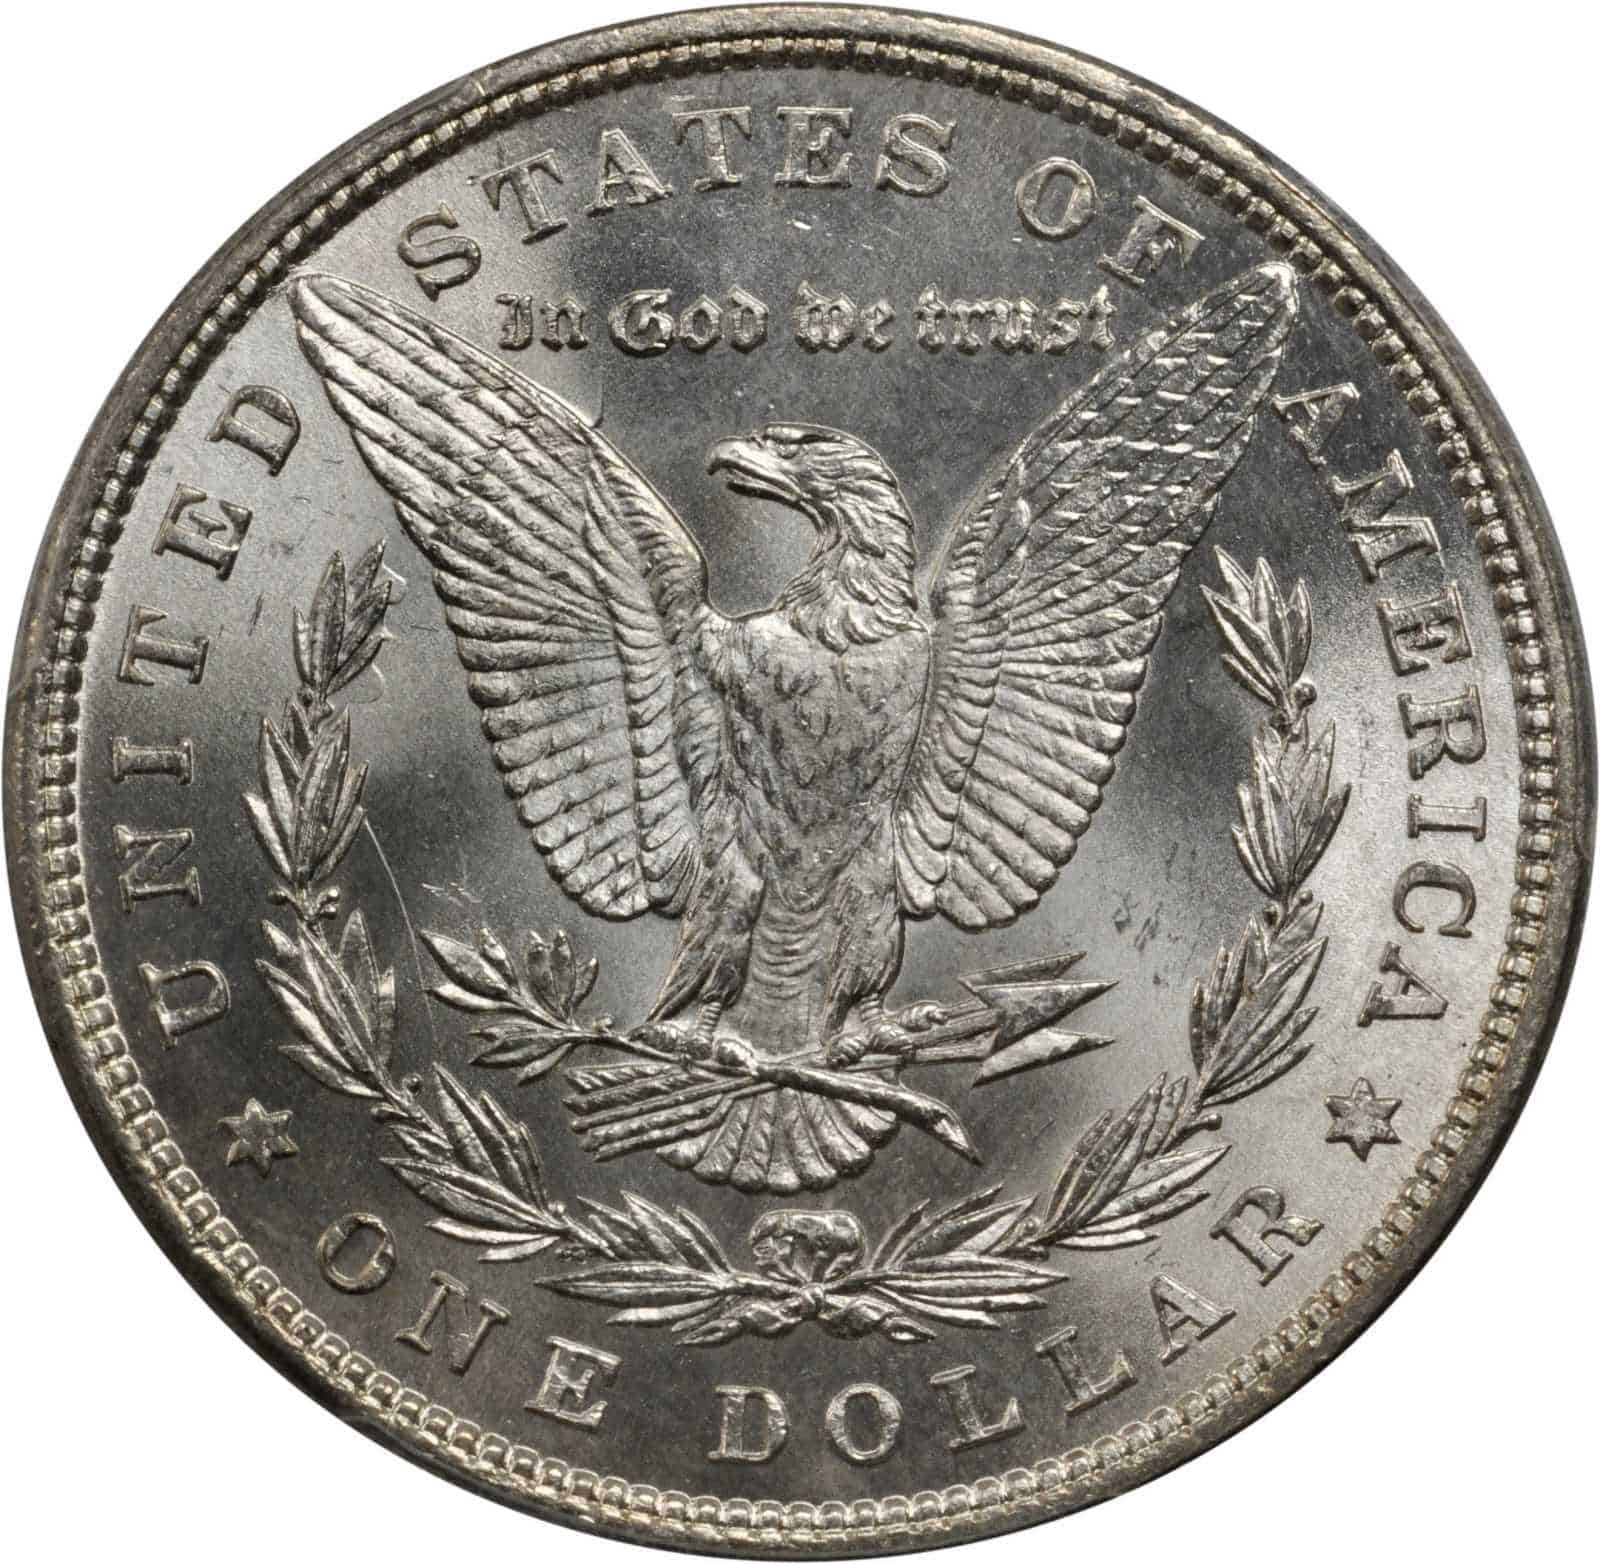 The Reverse of the 1880 Silver Dollar